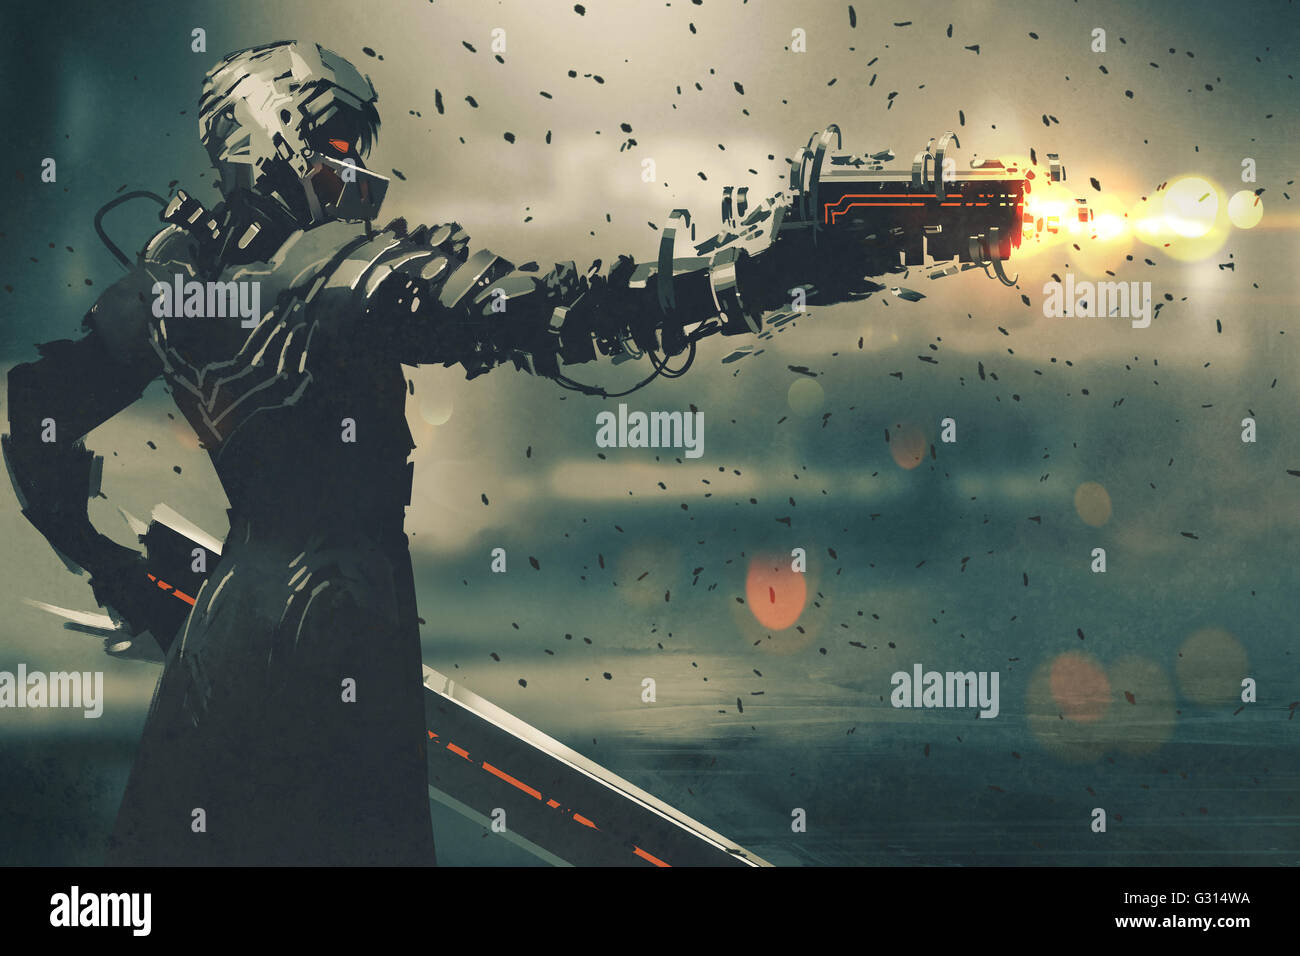 sci-fi gaming character in futuristic suit aiming weapon,shooting gun,illustration Stock Photo